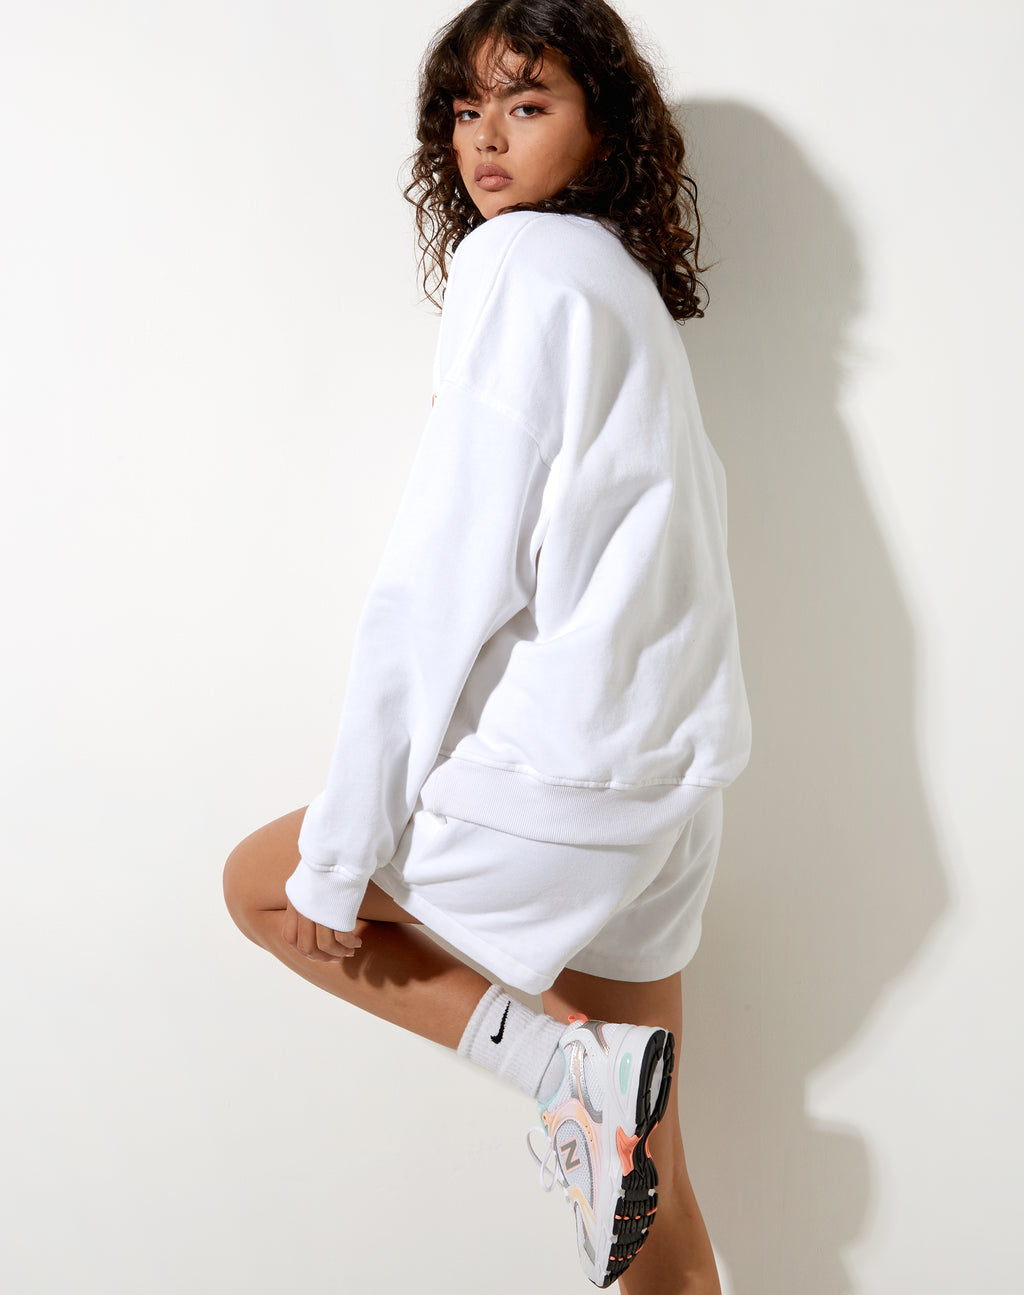 Ted Sweatshirt in White Pearl Sand Embro